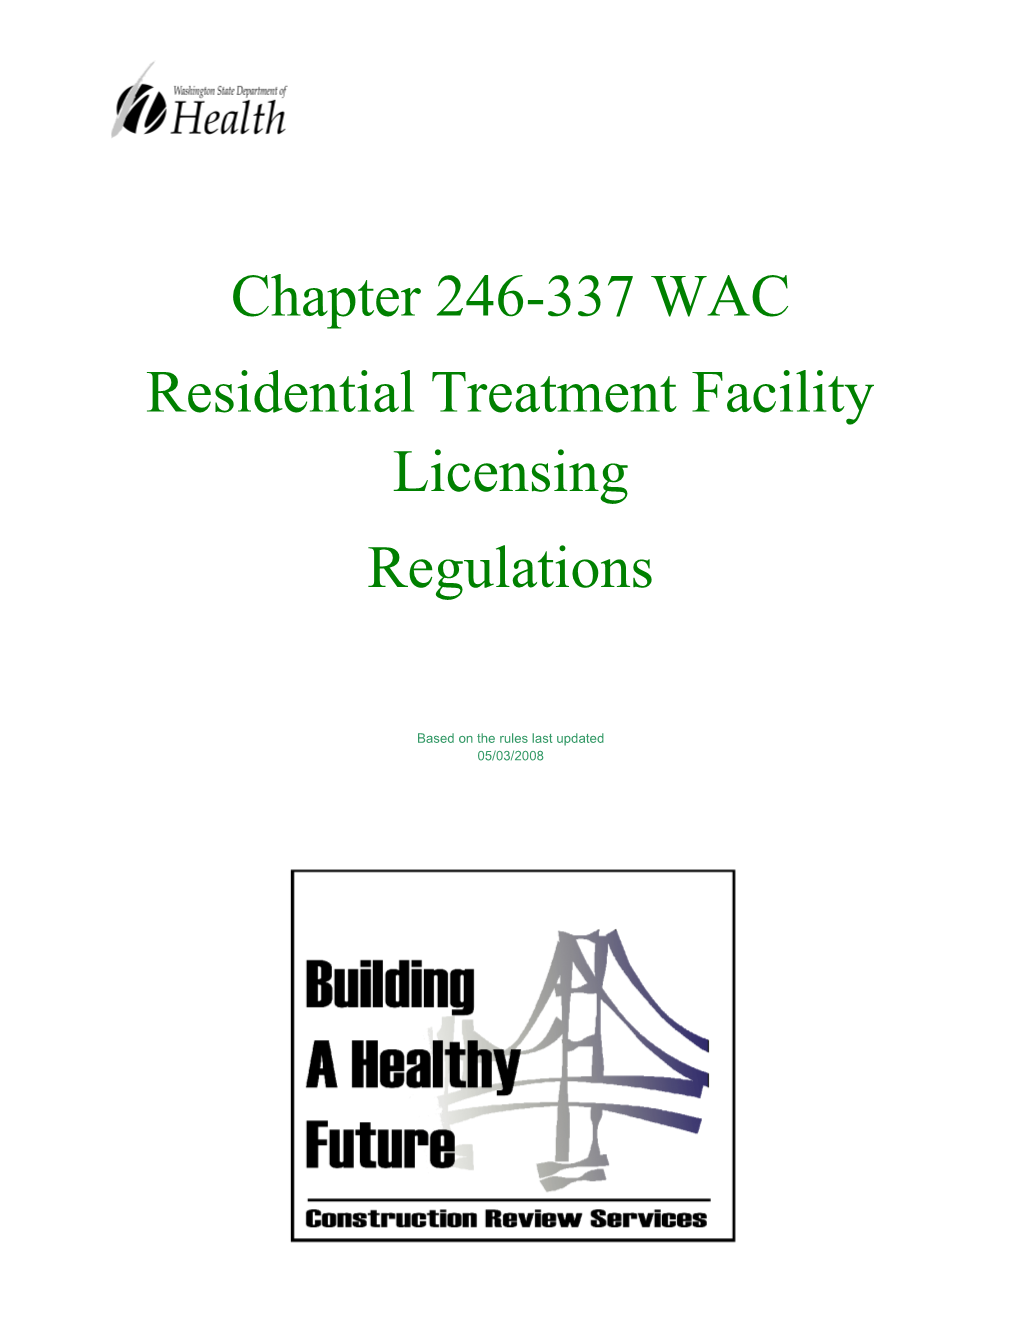 Chapter 246-337 WAC: Residential Treatment Facility Licensing Regulations